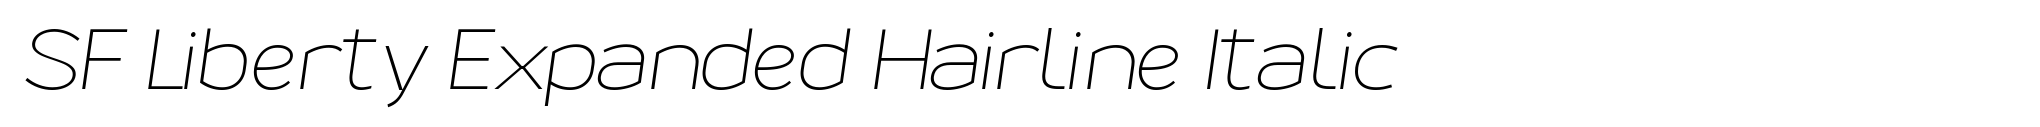 SF Liberty Expanded Hairline Italic image